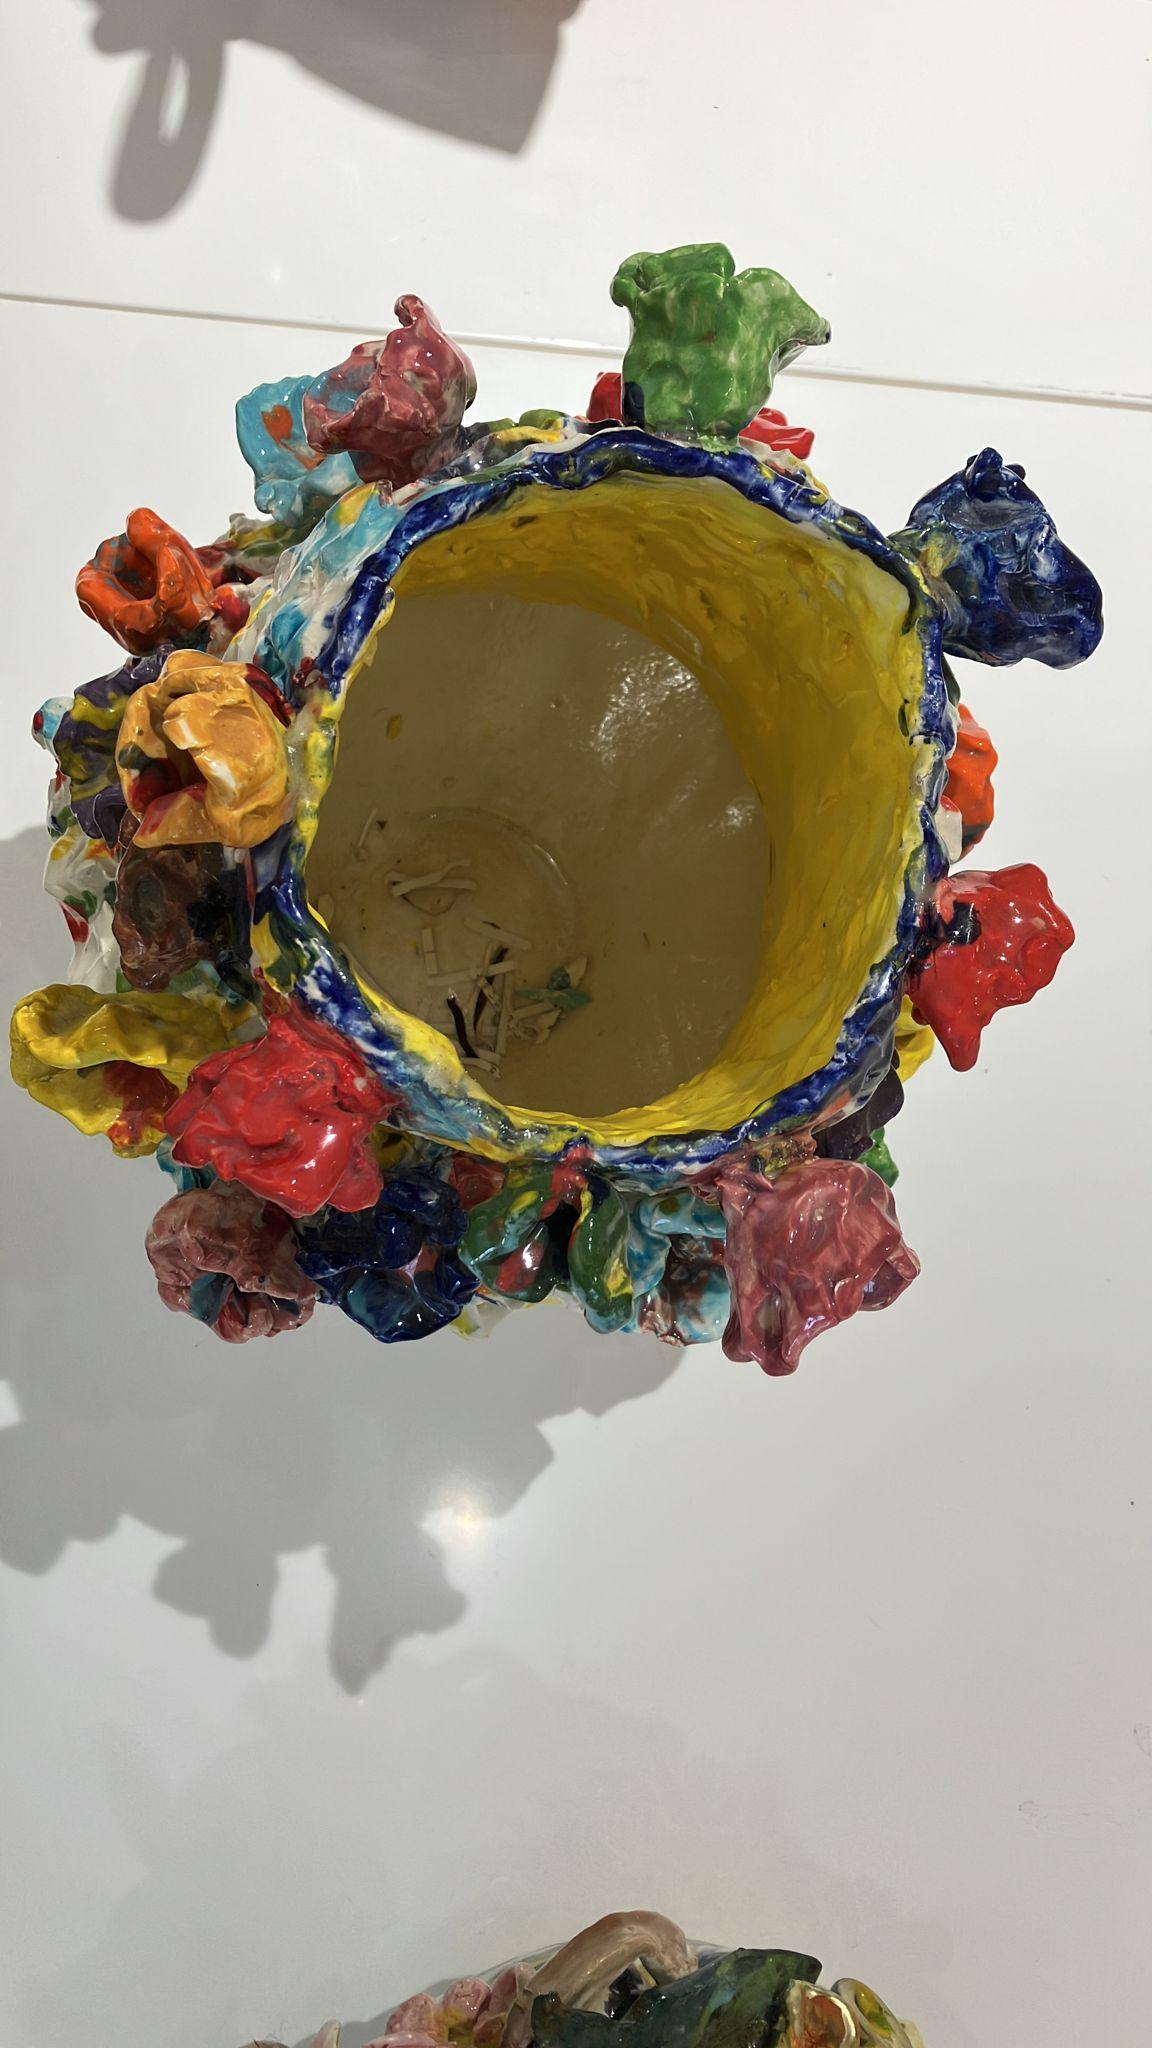 Colored flowers, by Charo Oquet
Glazed Ceramic
18” x 14” x 14”
2018

These gravity-defying ceramics stacked constructions struggle to soar beyond the boundaries of the spaces that contain them, often appearing to teeter in the brink of collapse.